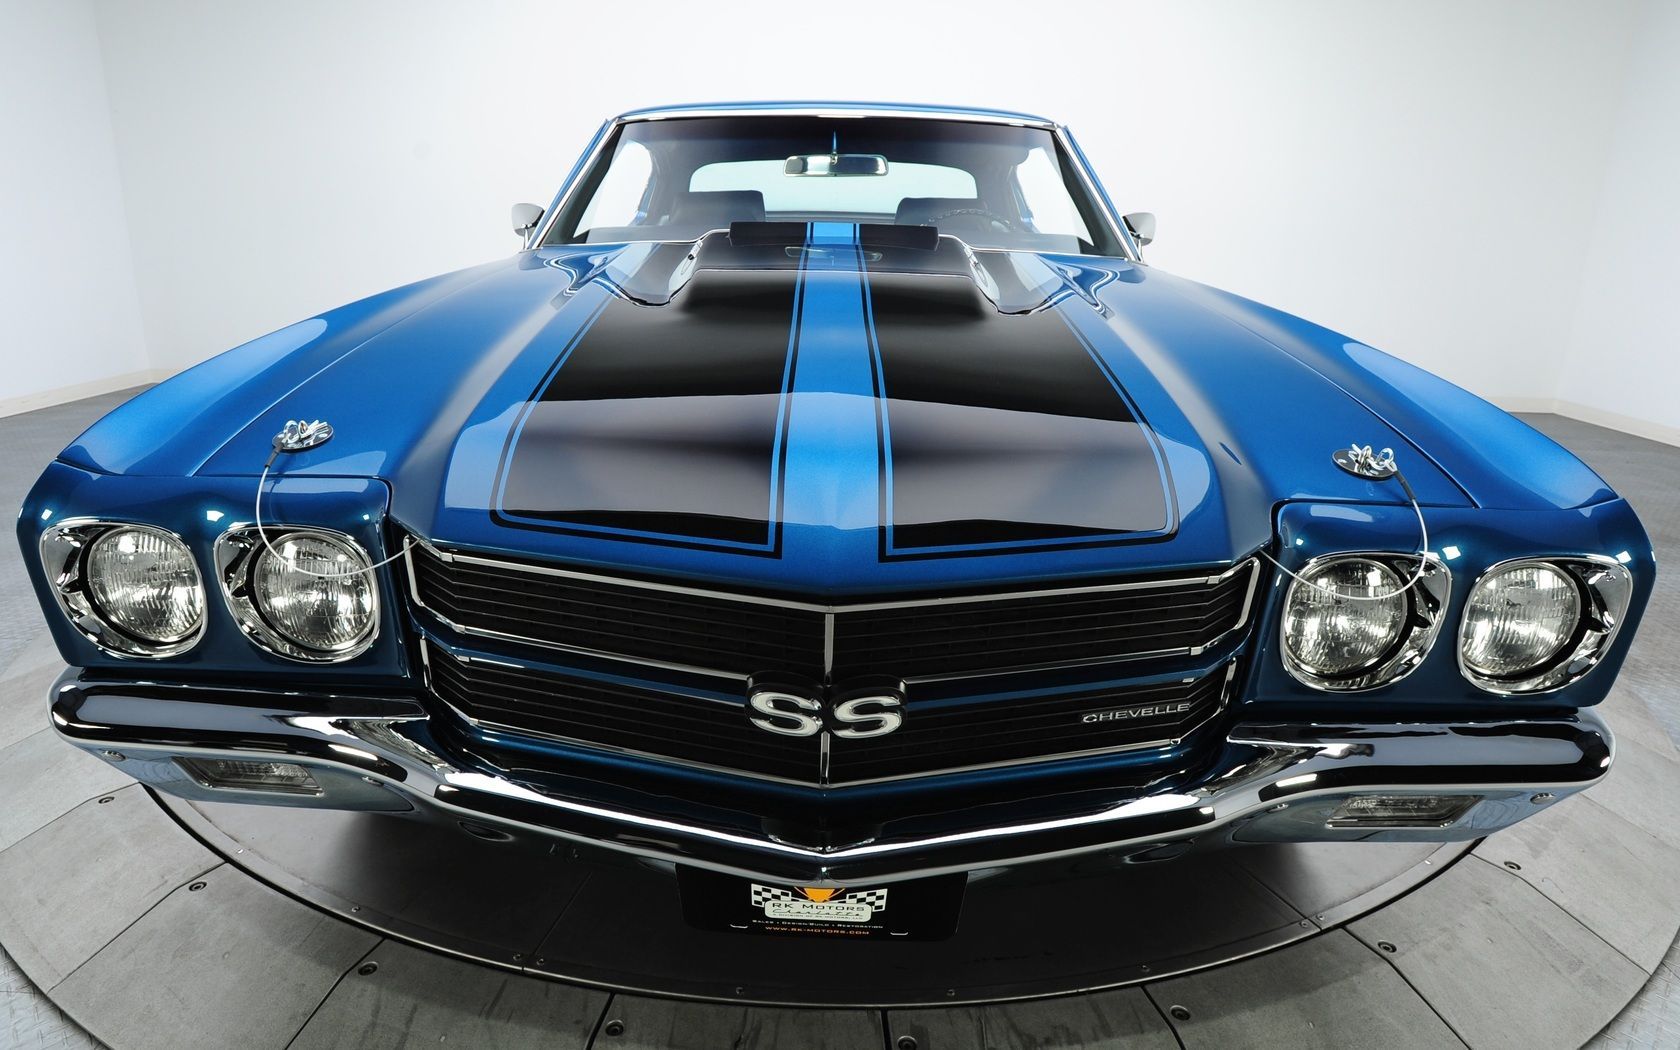 Chevy Muscle Car Wallpaper Free Chevy Muscle Car Background